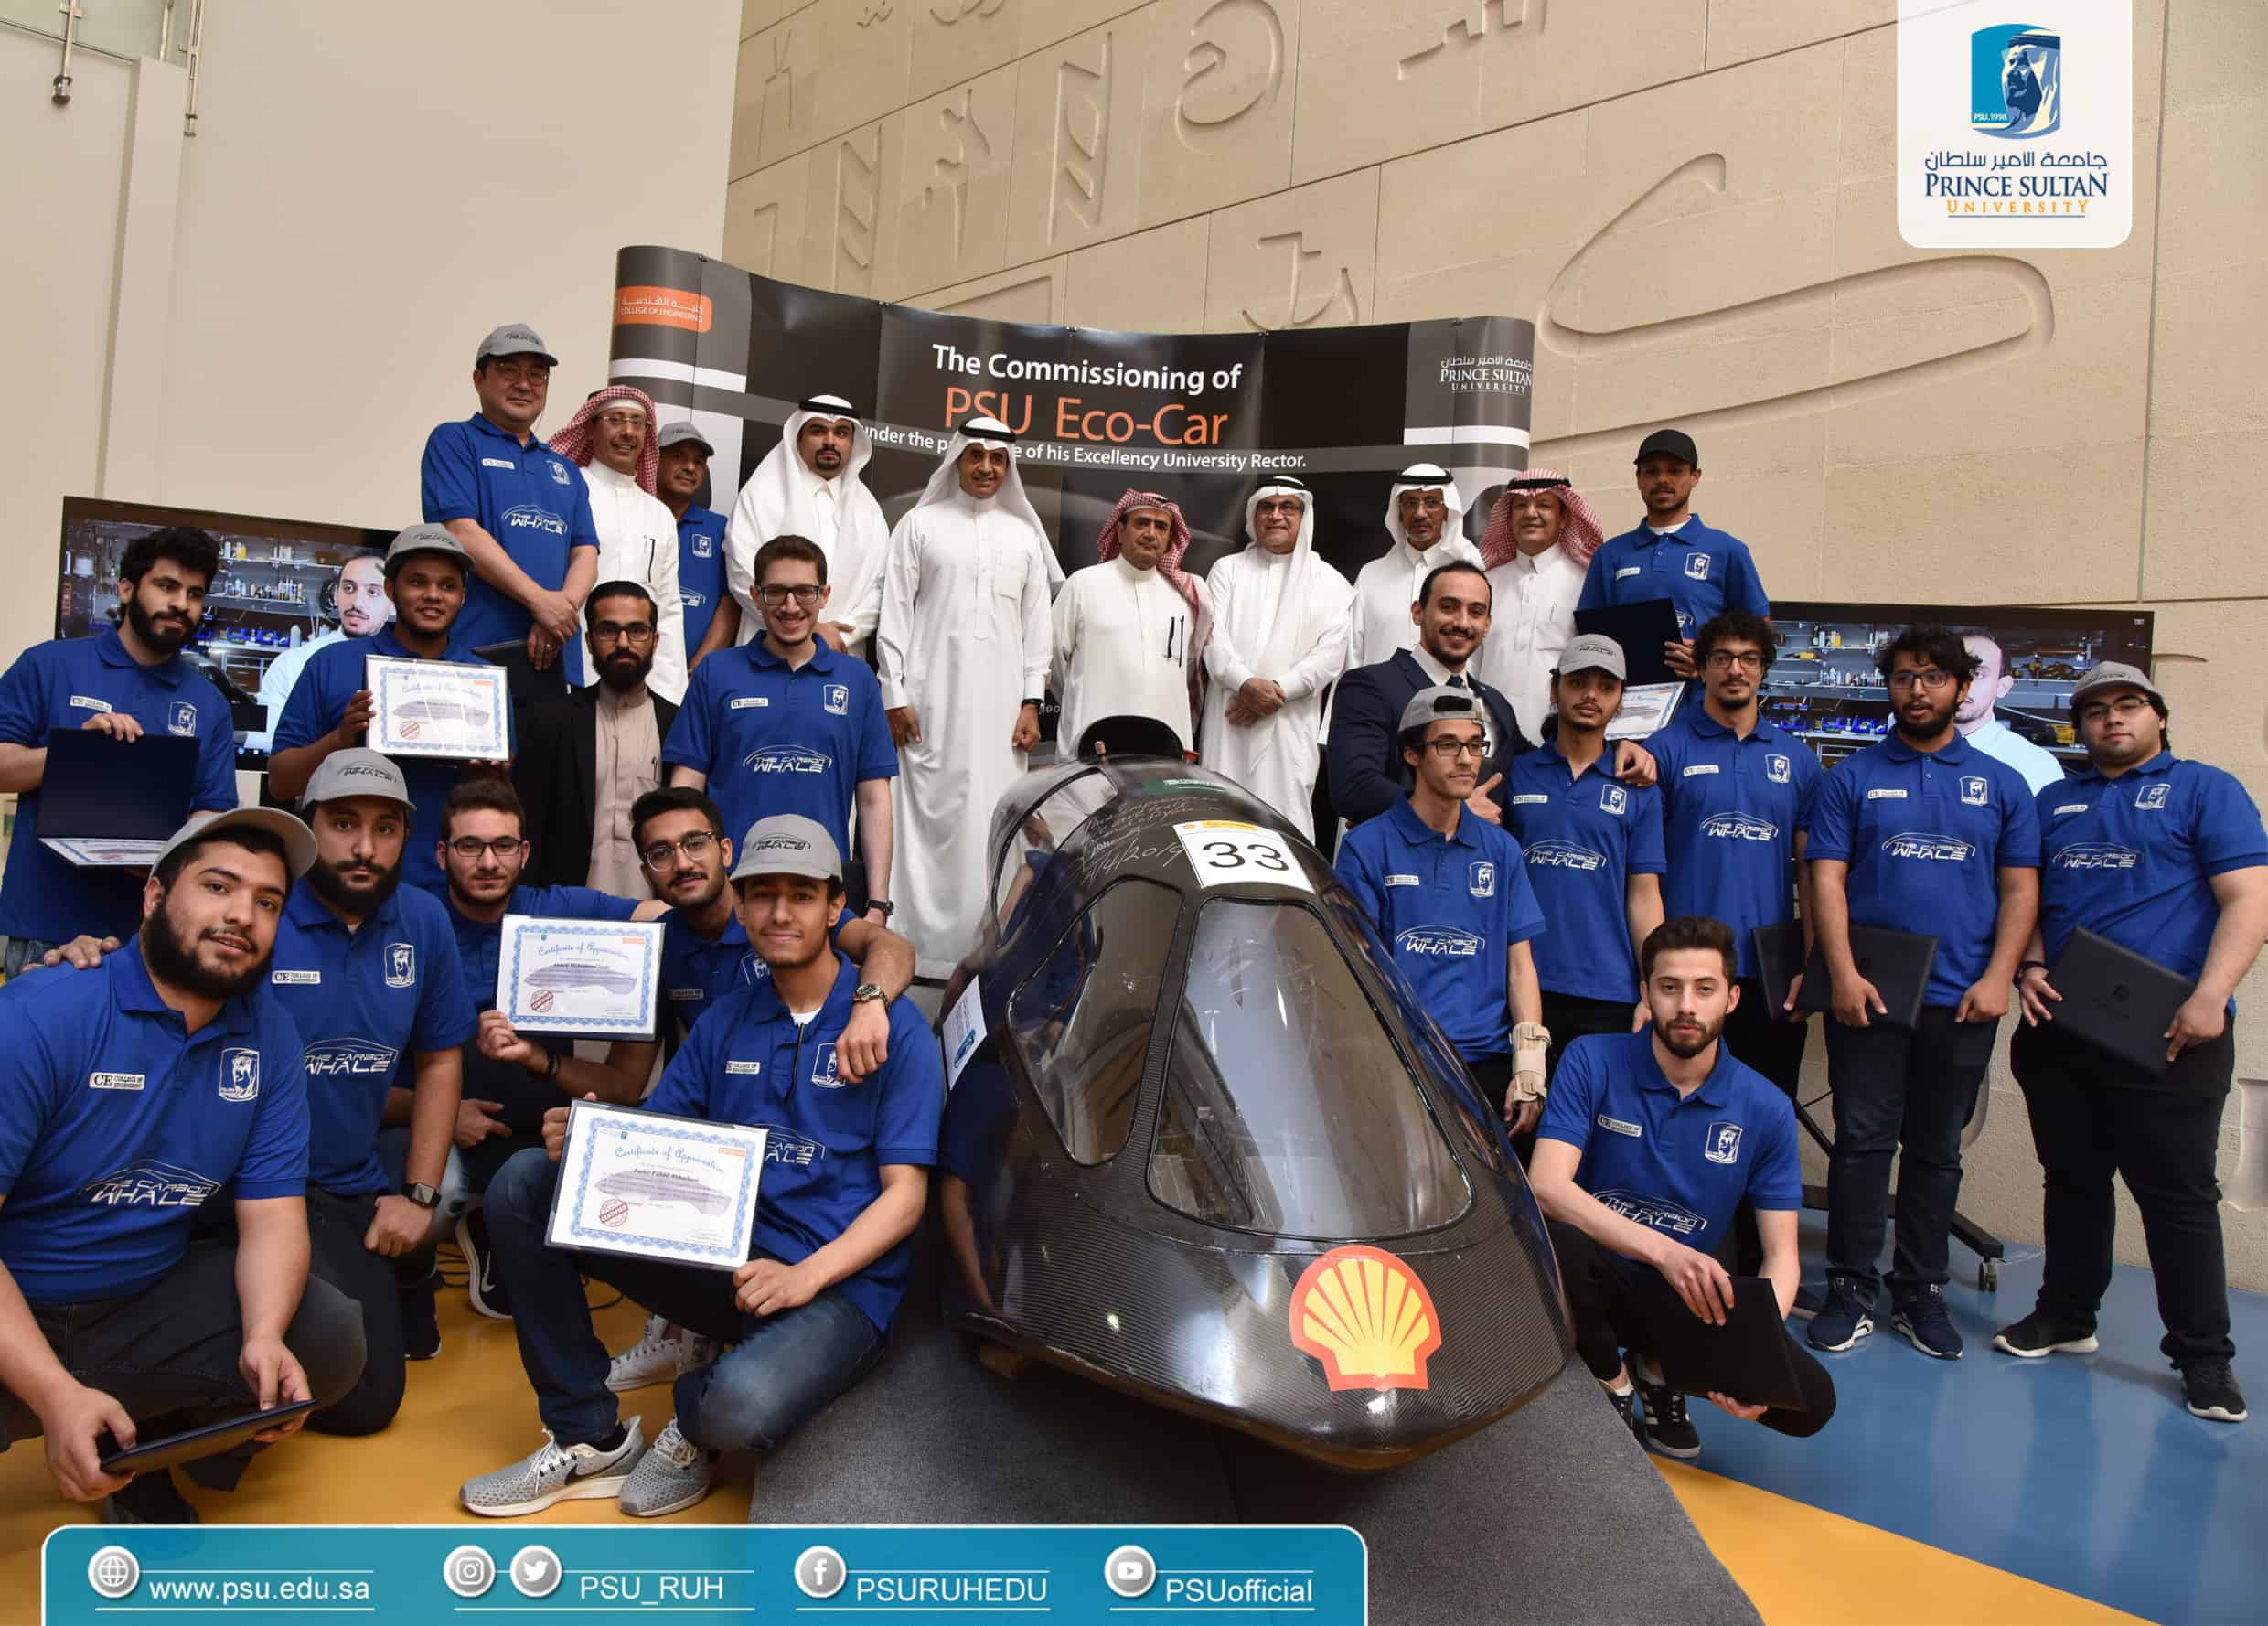 College of Engineering for both Male and Female is Preparing to Participate in Shell Eco-Marathon 2020 with Two Cars after the Success of the First Attempt with “Vision” Car